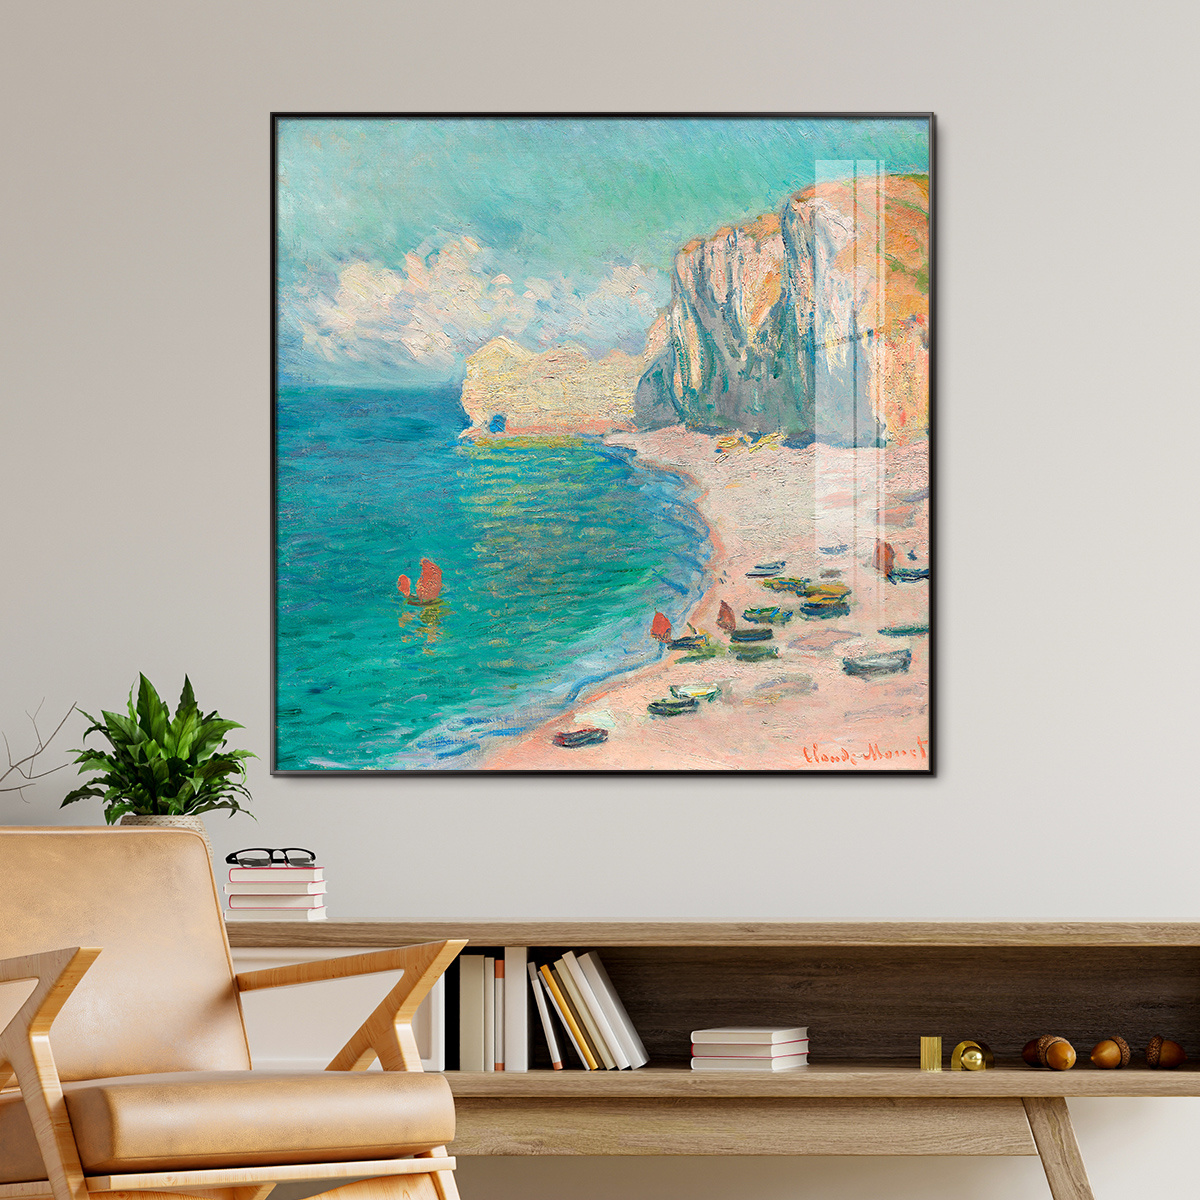 

1pc Framed Canvas Printing Wall Art, Vintage Oil Painting The Beach And The Falaise D'amont (1885) By Claude Monet, Wall Art With Waterproof Wooden Back, For Home Room Office Hotel Bar Wall Decoration